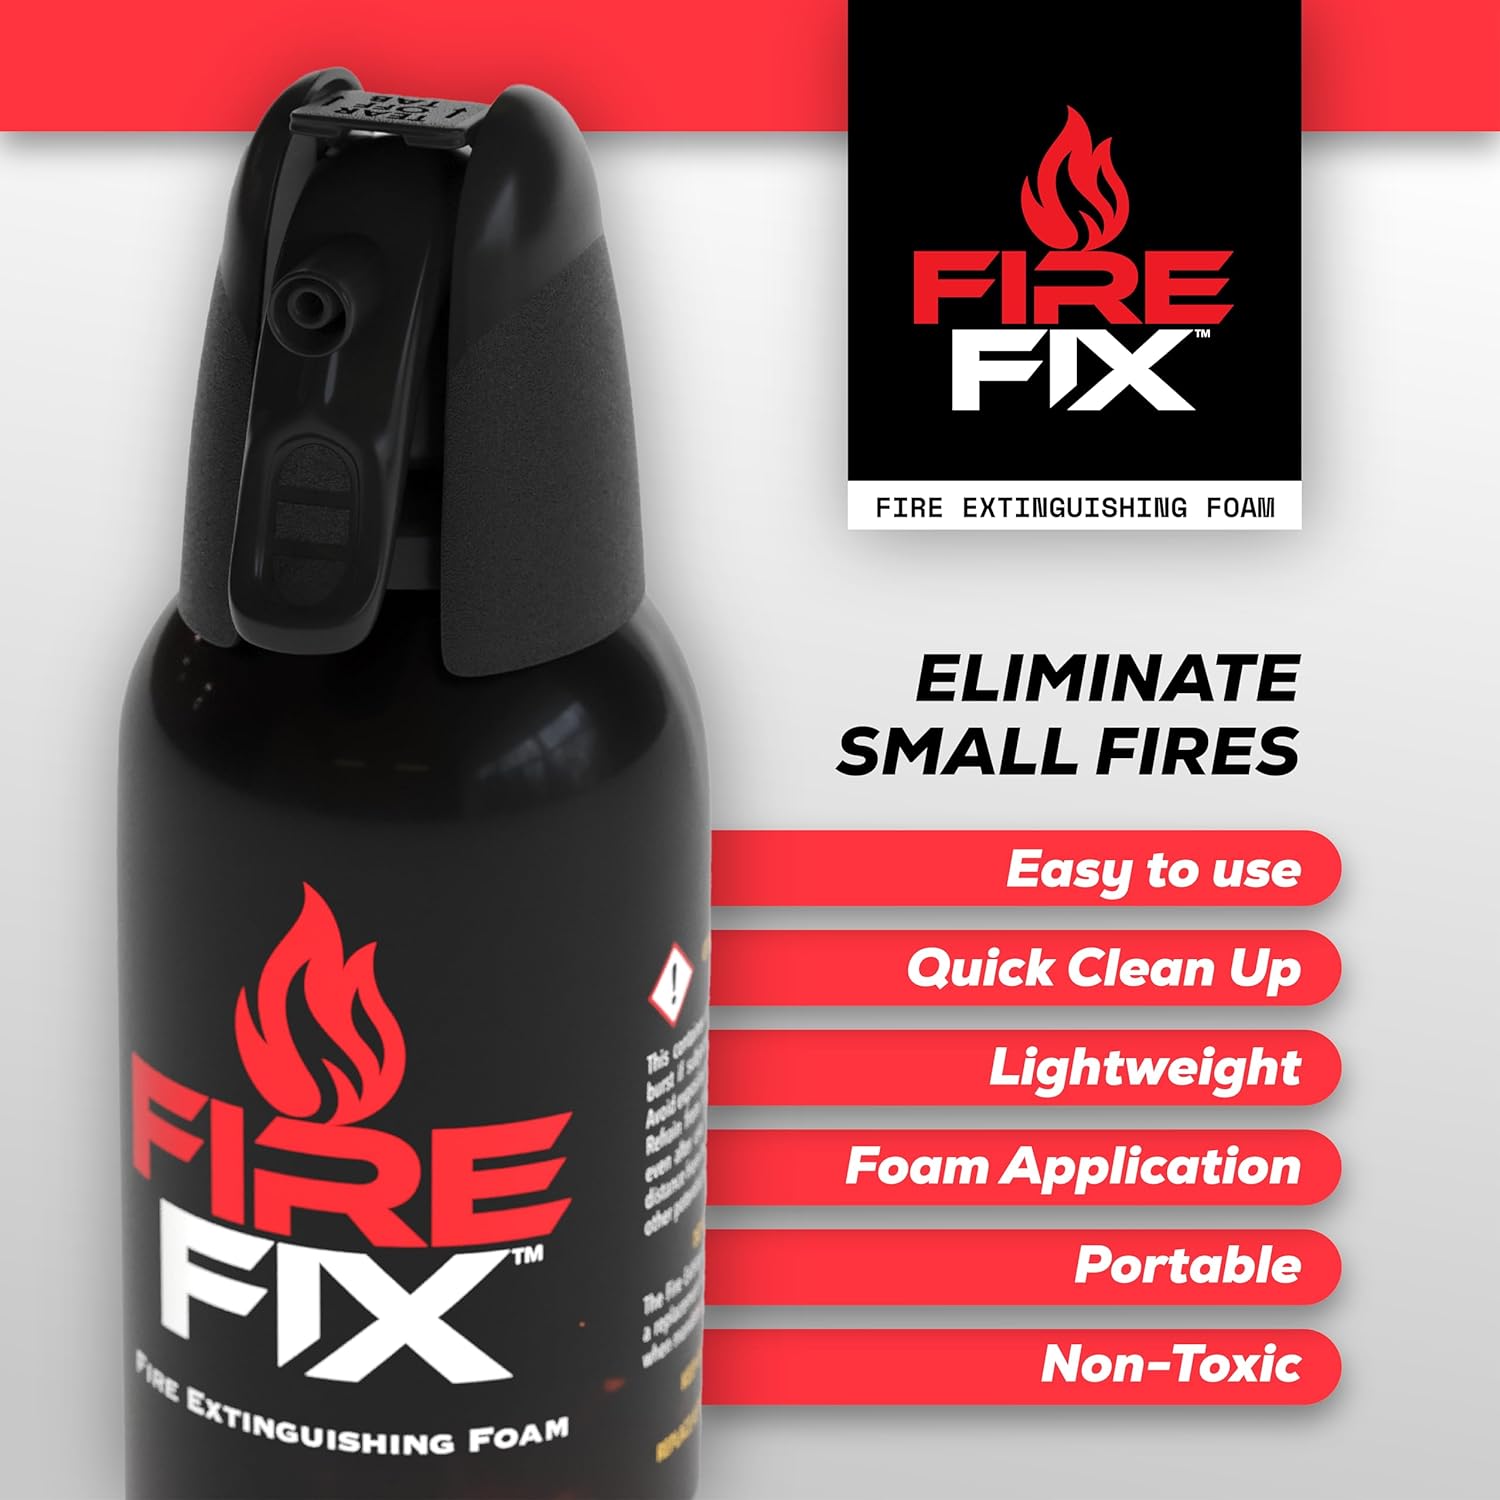 Close-up of Fire Fix fire extinguishing foam with easy-to-use features, ideal for quick and safe fire suppression in homes and vehicles.